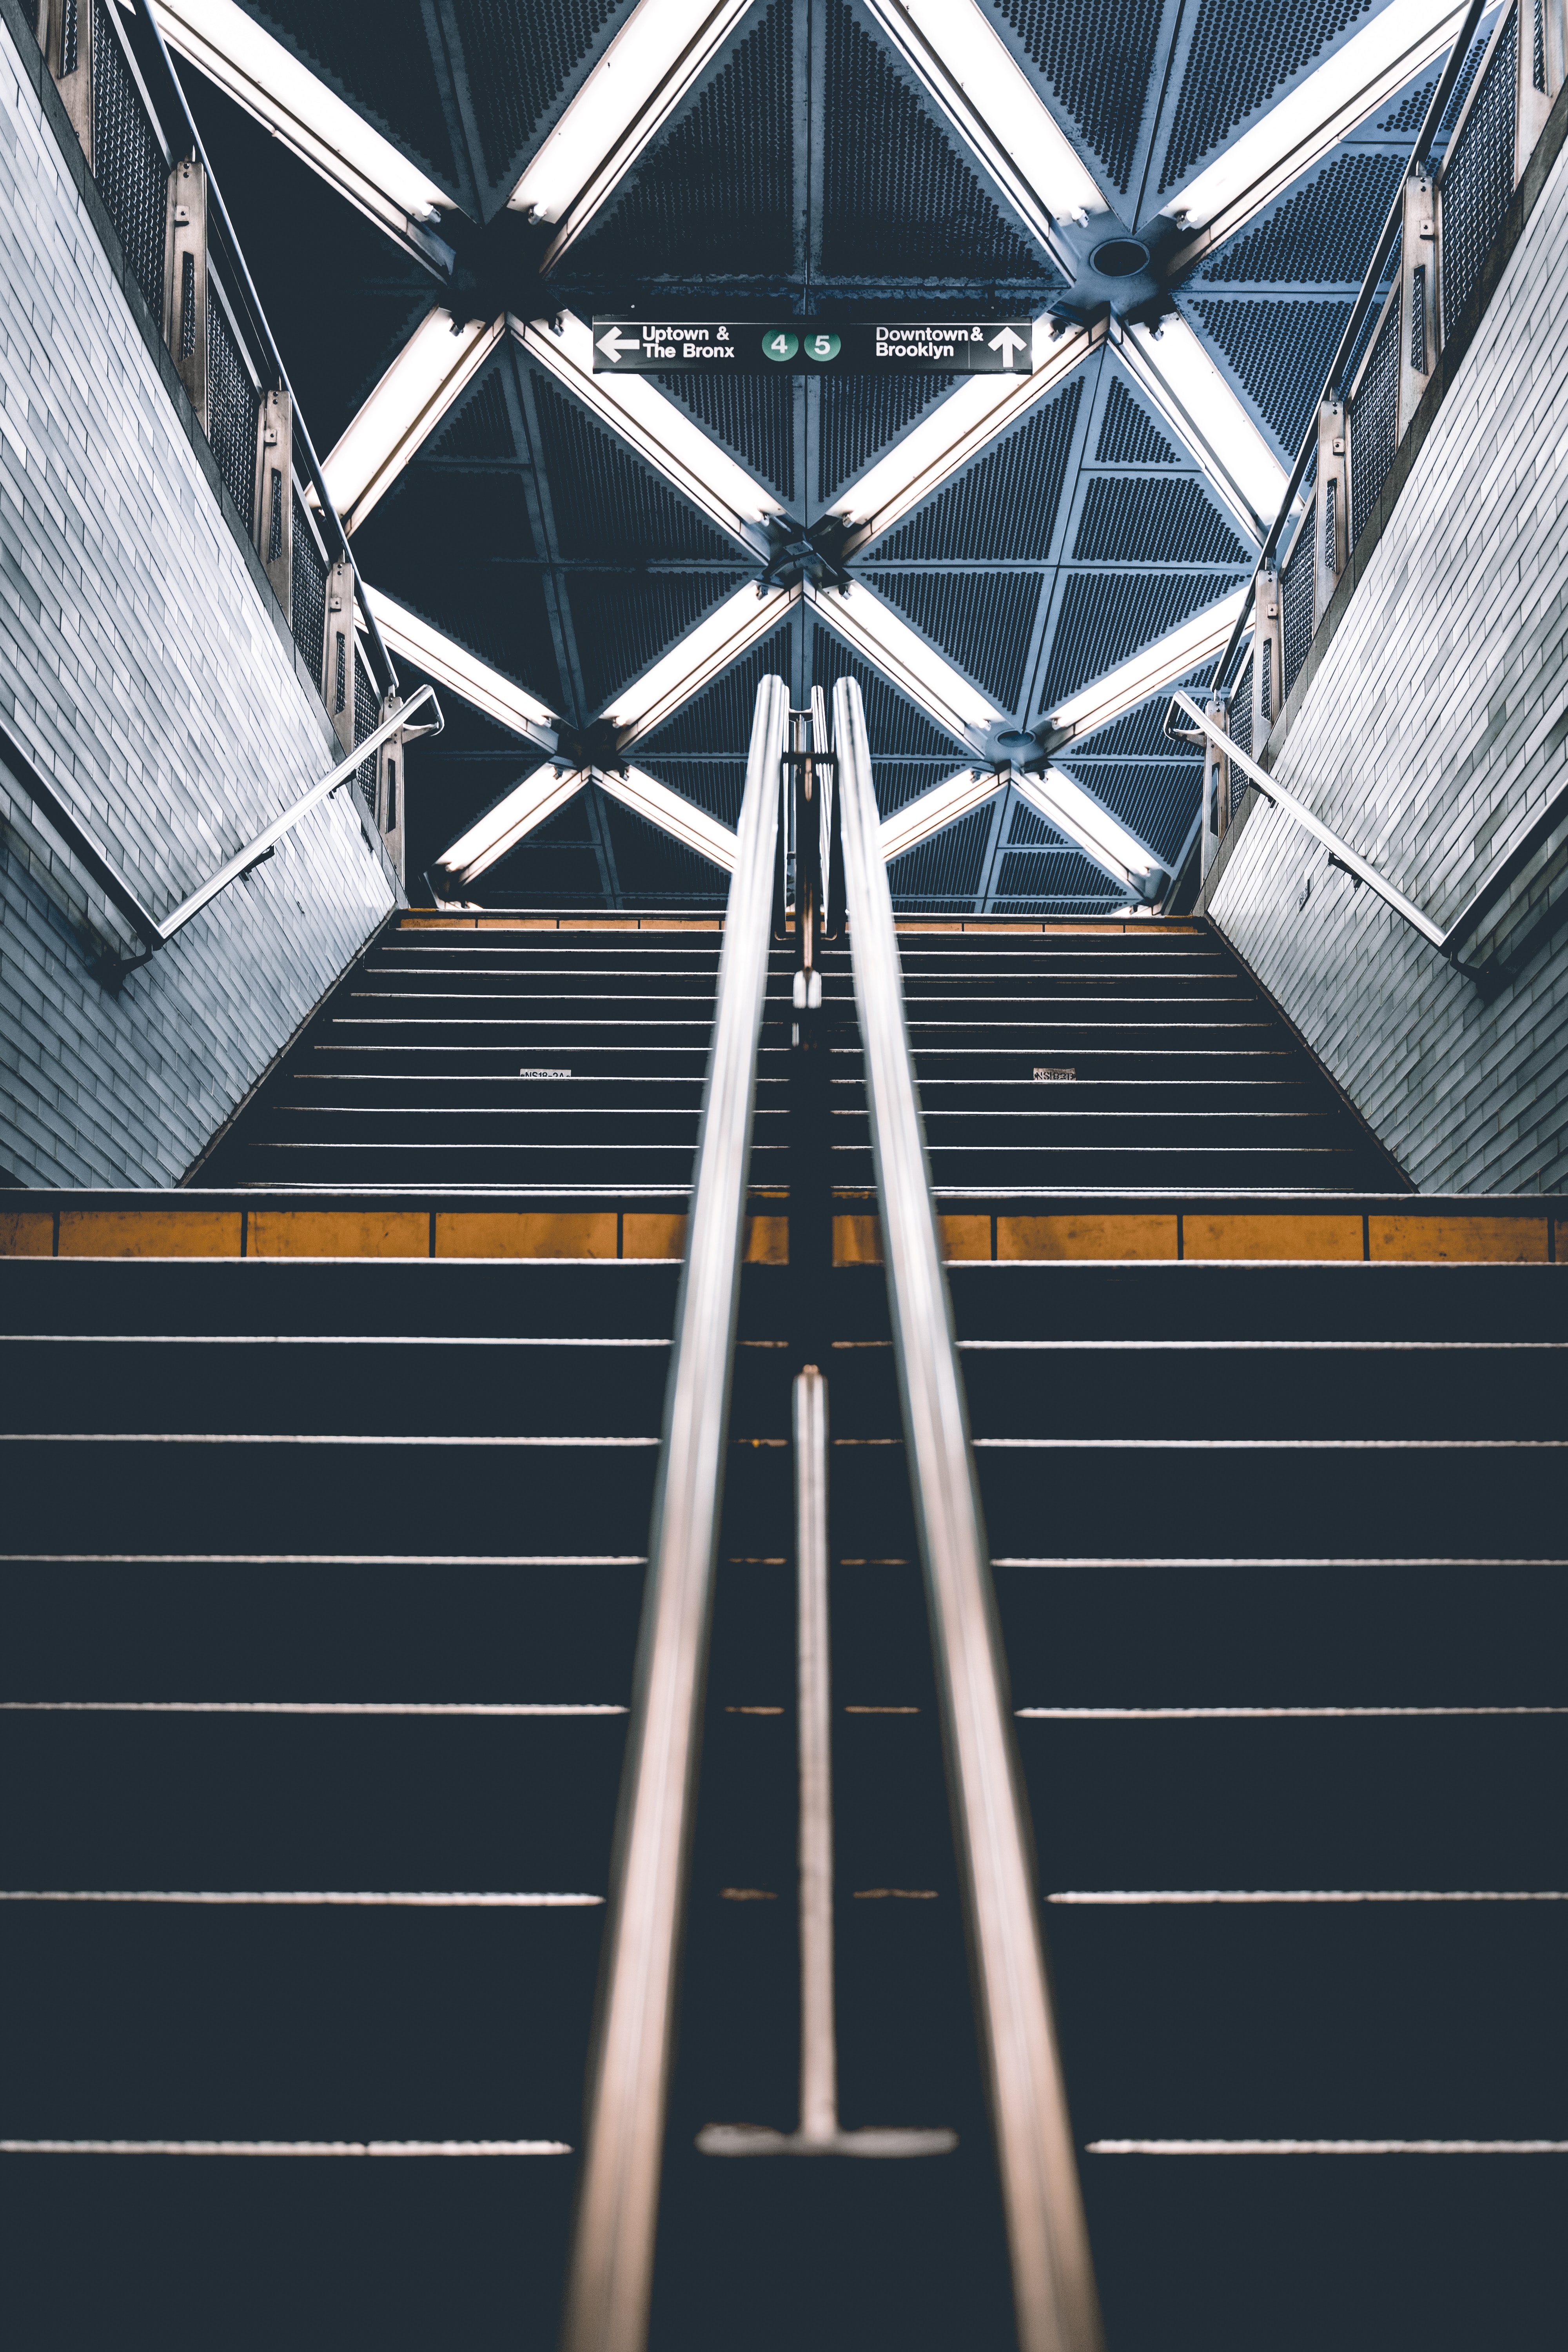 subway, miscellanea, miscellaneous, ladder, stairs, steps, metro, handrails, underground pass lock screen backgrounds